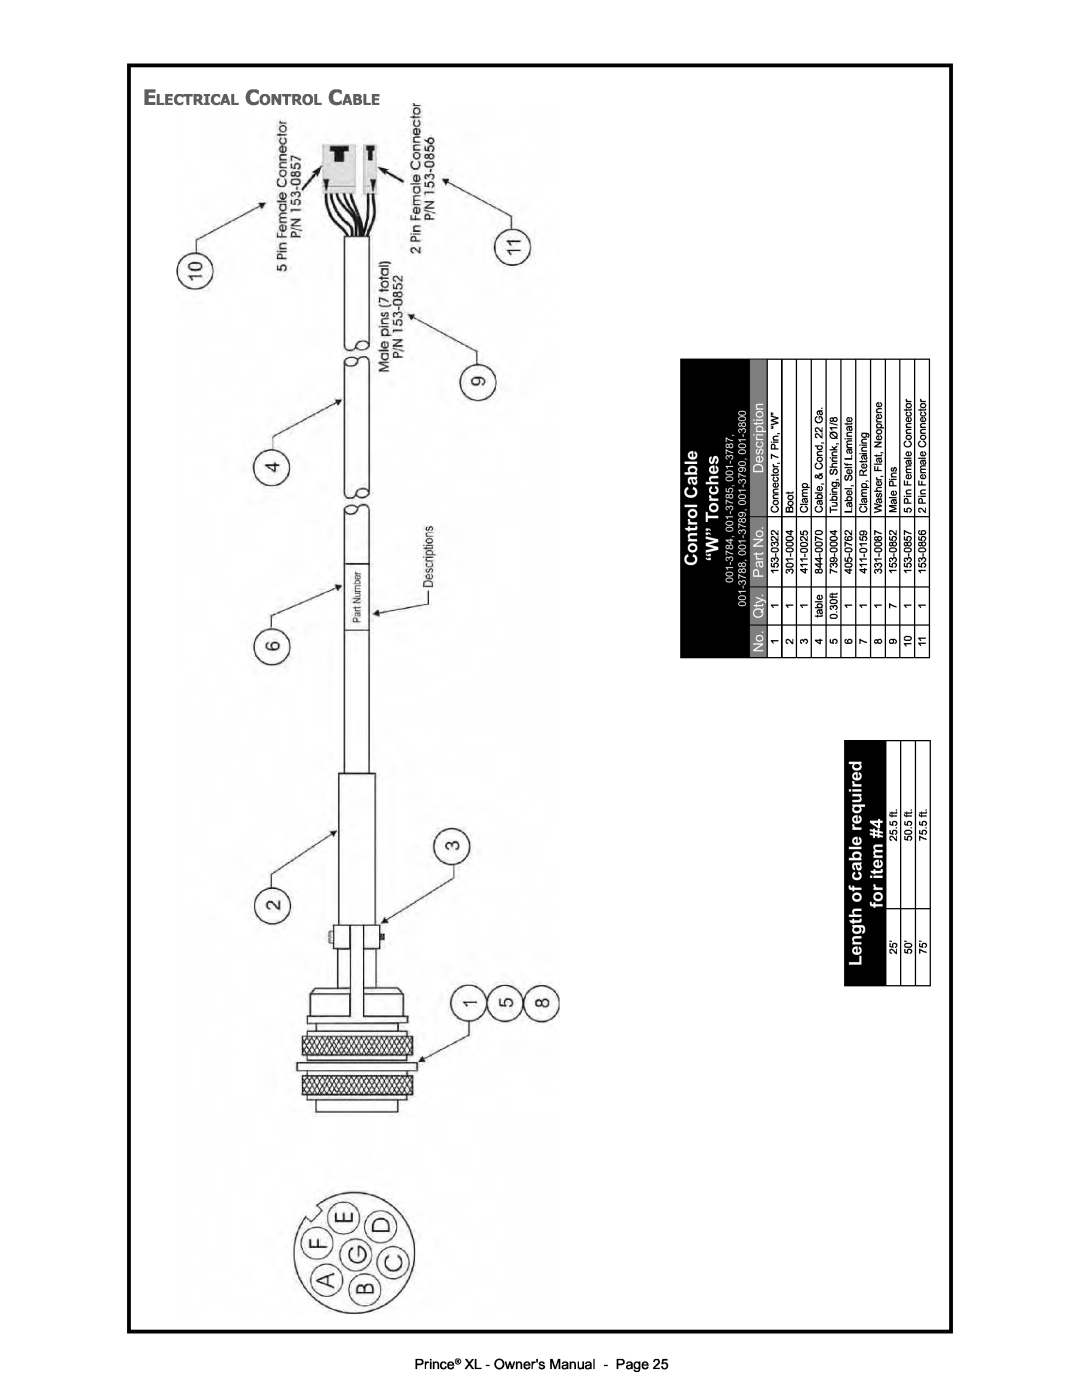 Lincoln Electric IM818 manual Length of cable required for item #4, Control Cable “W” Torches, Description, 001-3784 